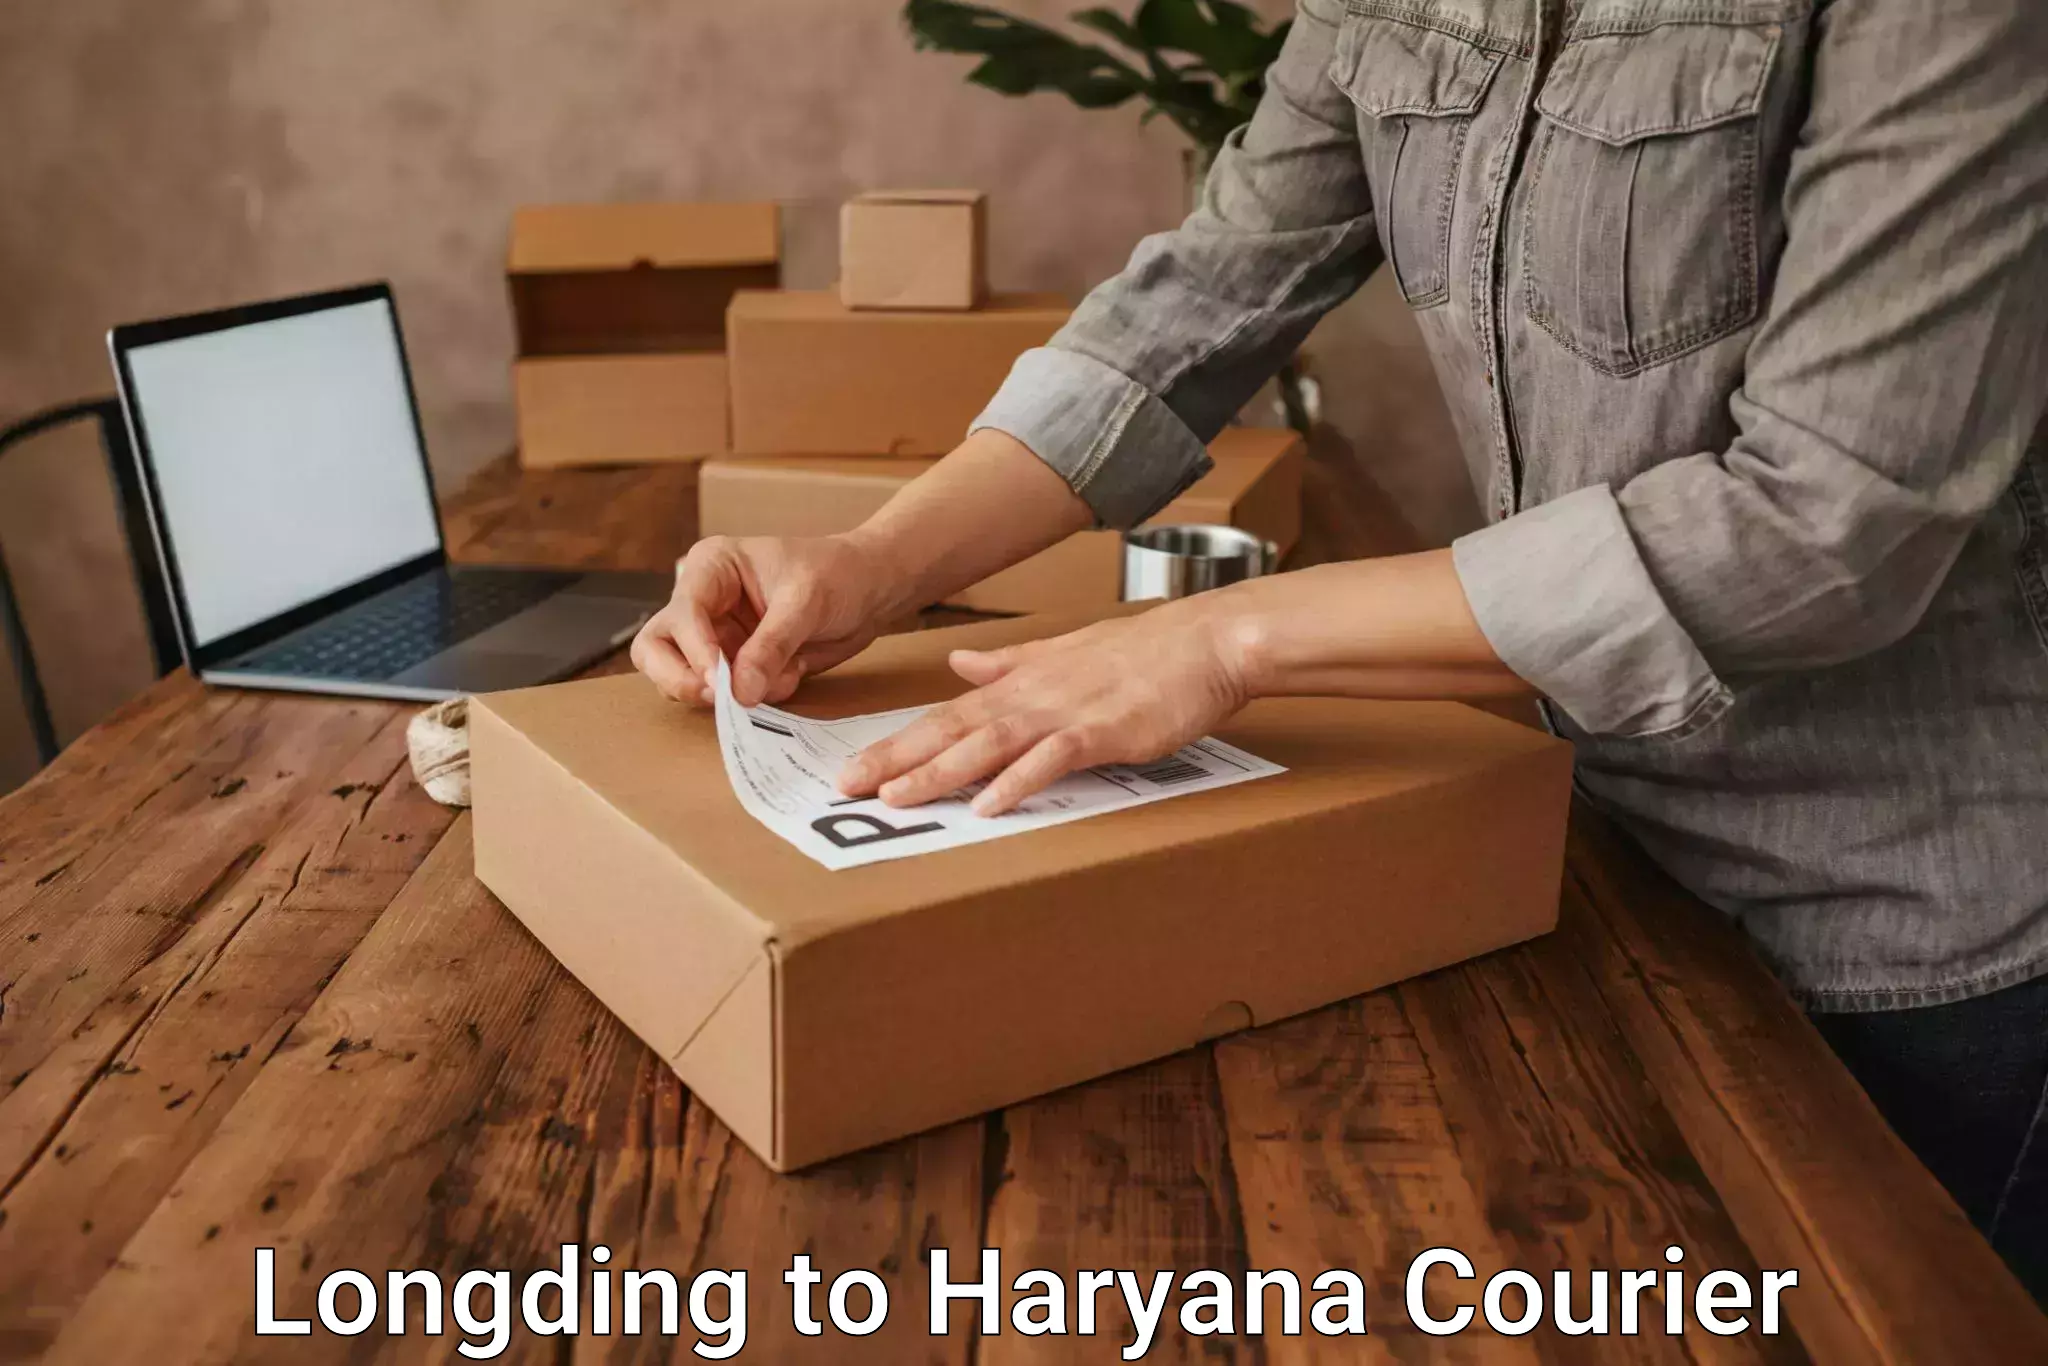 24-hour courier service Longding to Haryana